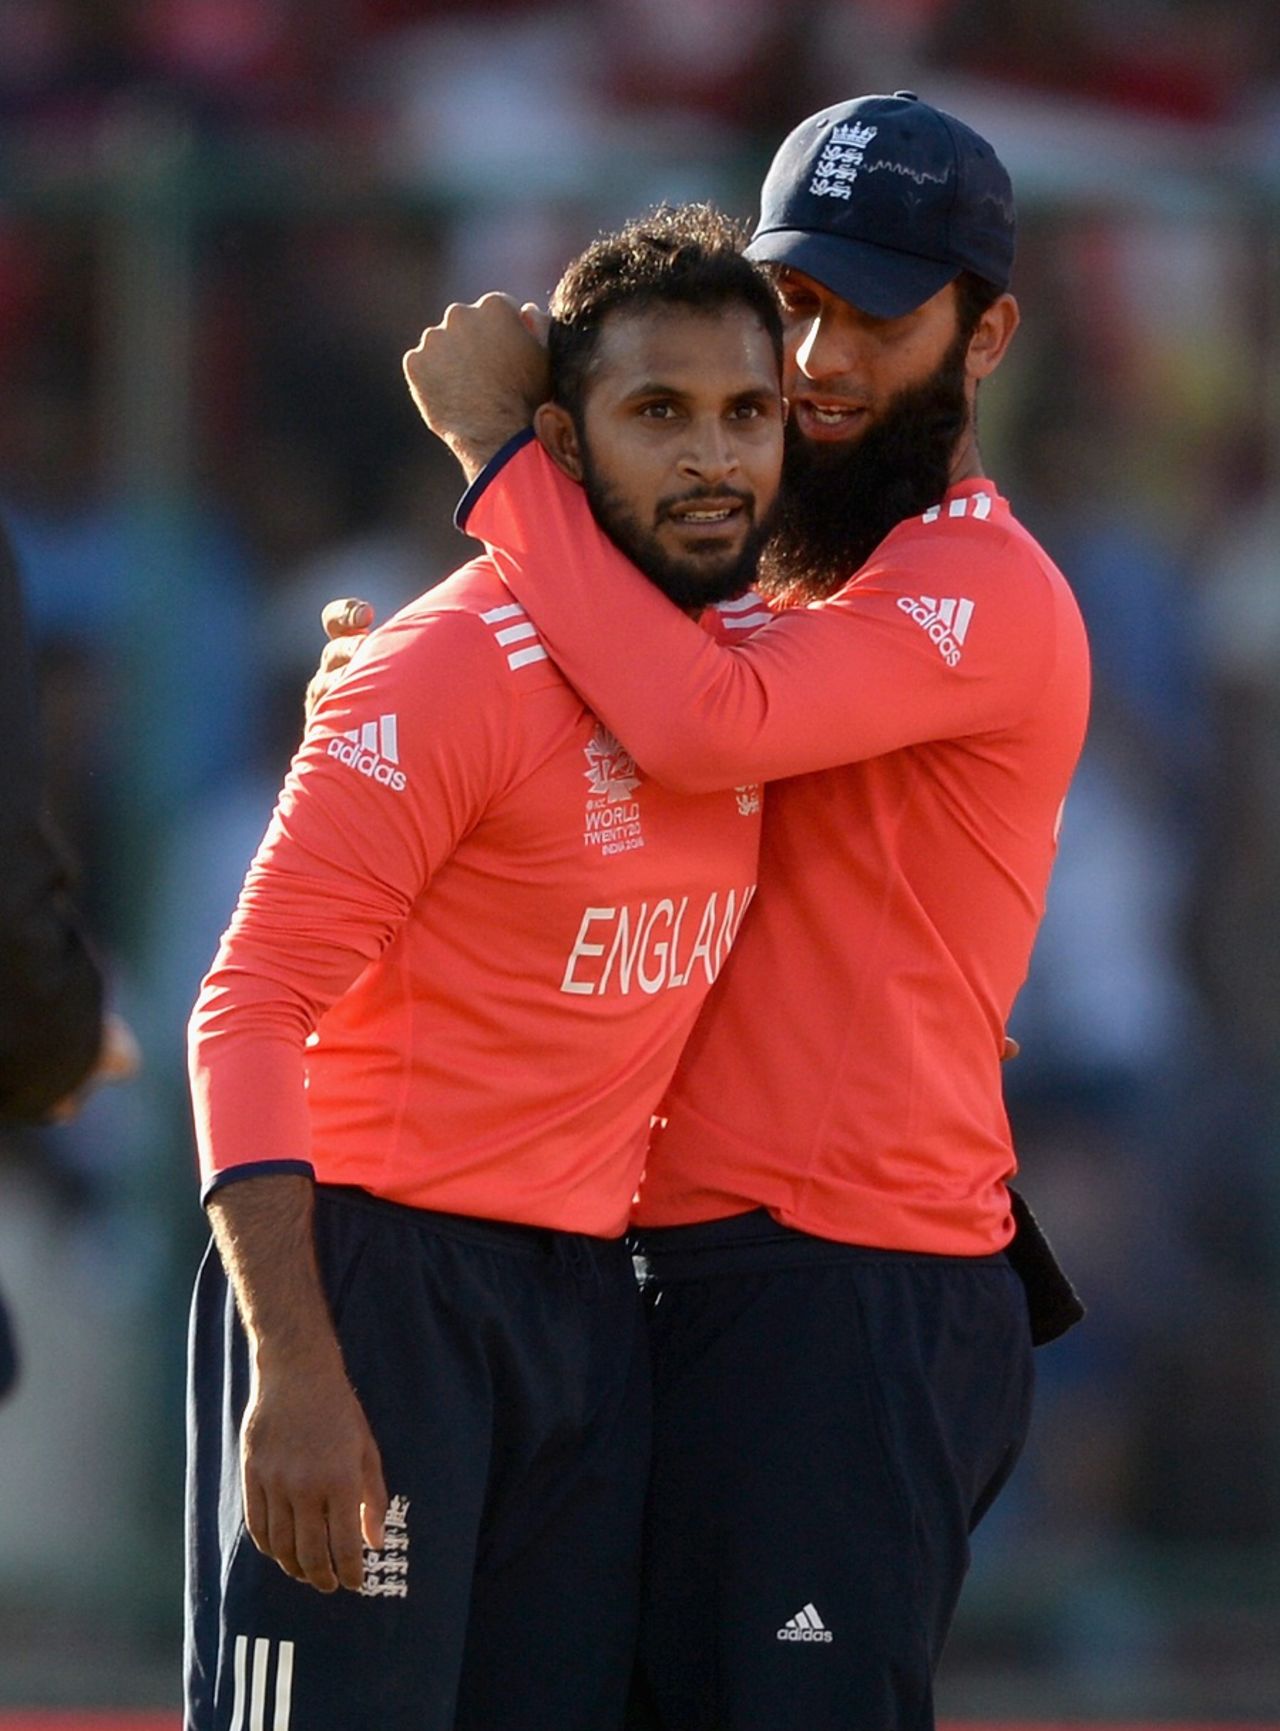 Moeen Ali and Adil Rashid celebrate a wicket, Afghanistan v England, World T20 2016, Group 1, Delhi, March 23, 2016